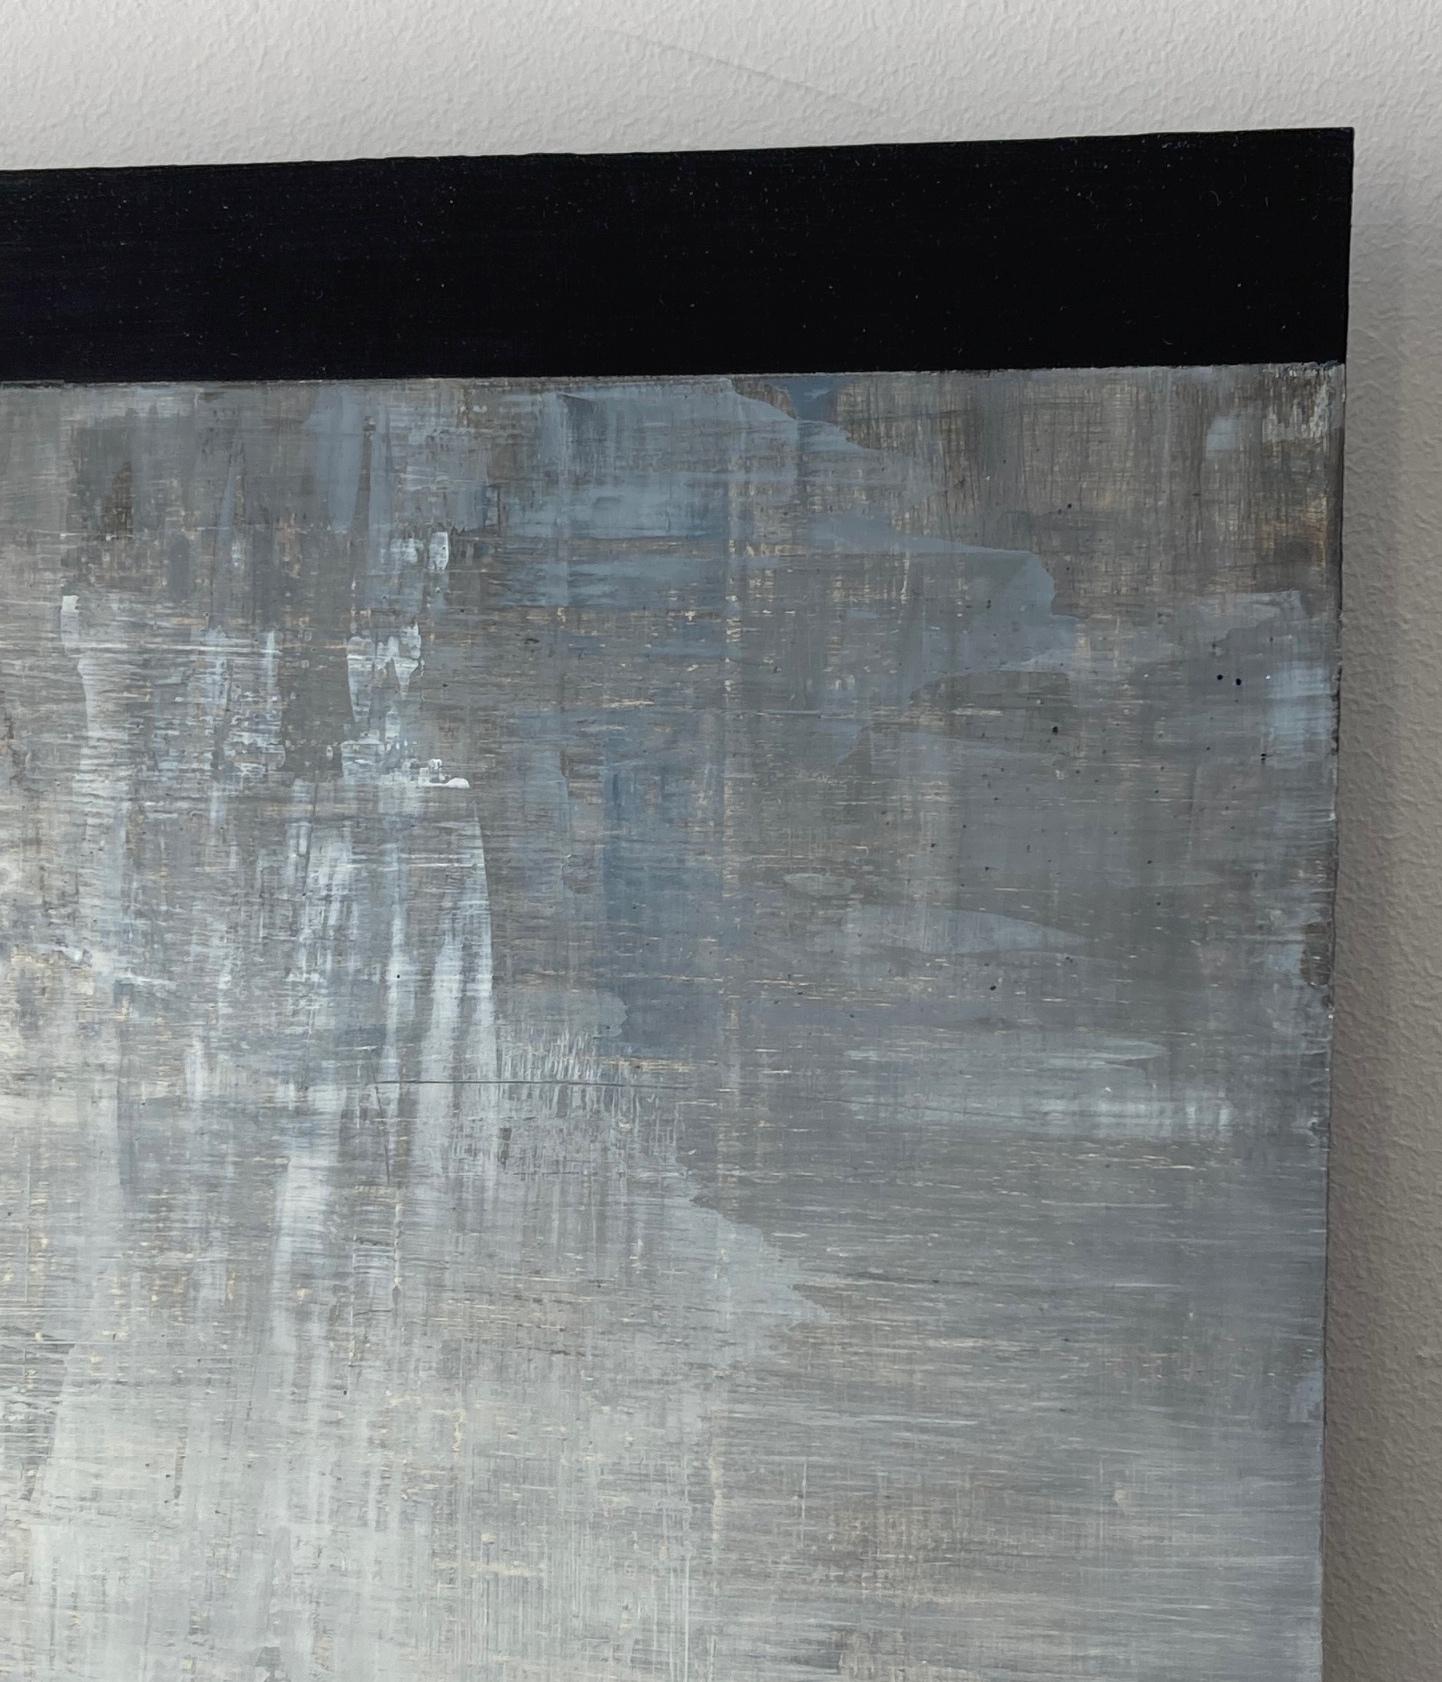 At the still point 4, atmospheric geometriic abstract in neutrals
2015, oil on dibond panel, 20x16x1